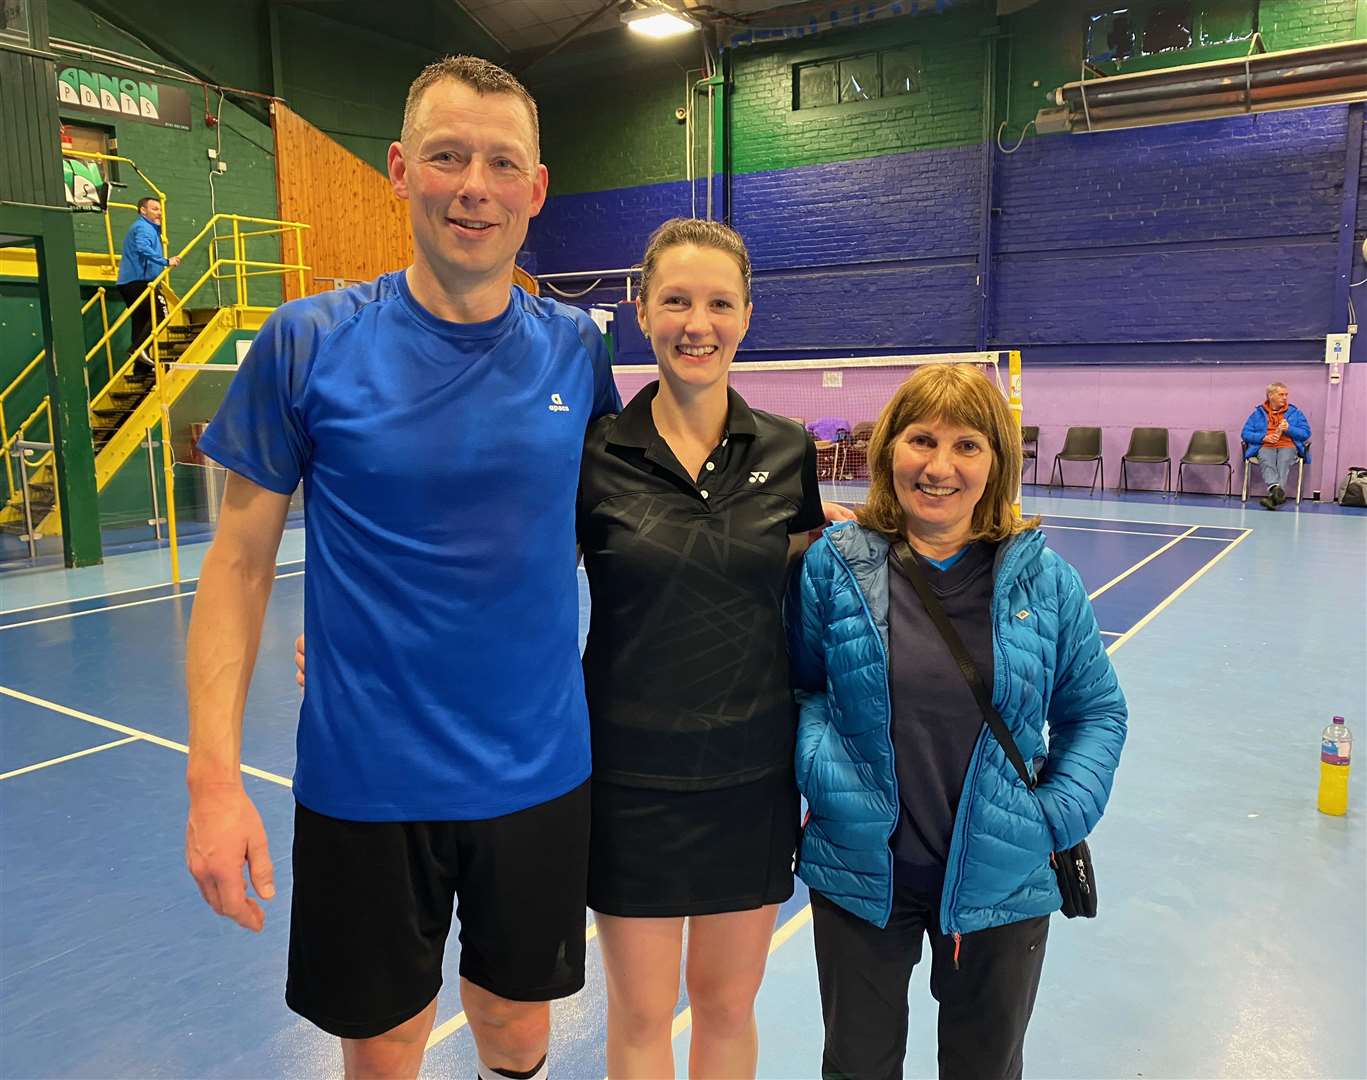 Caithness trio Mark and Shona Mackay and Jane Grant at the Sir Craig Reedie Badminton Centre in Glasgow.